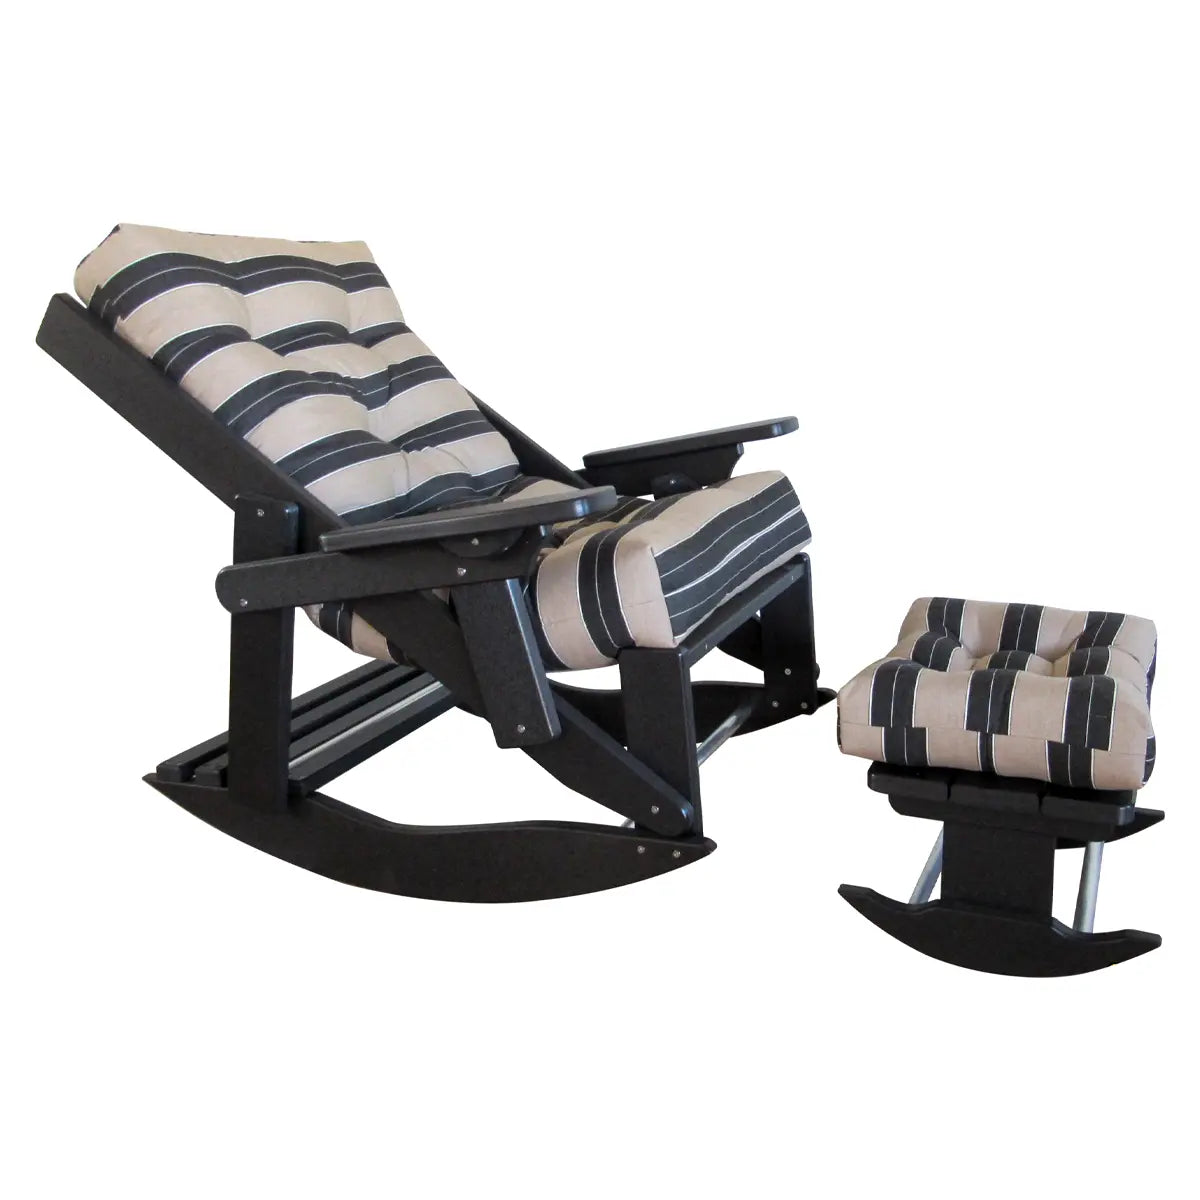 Footrest for Outdoor Chair